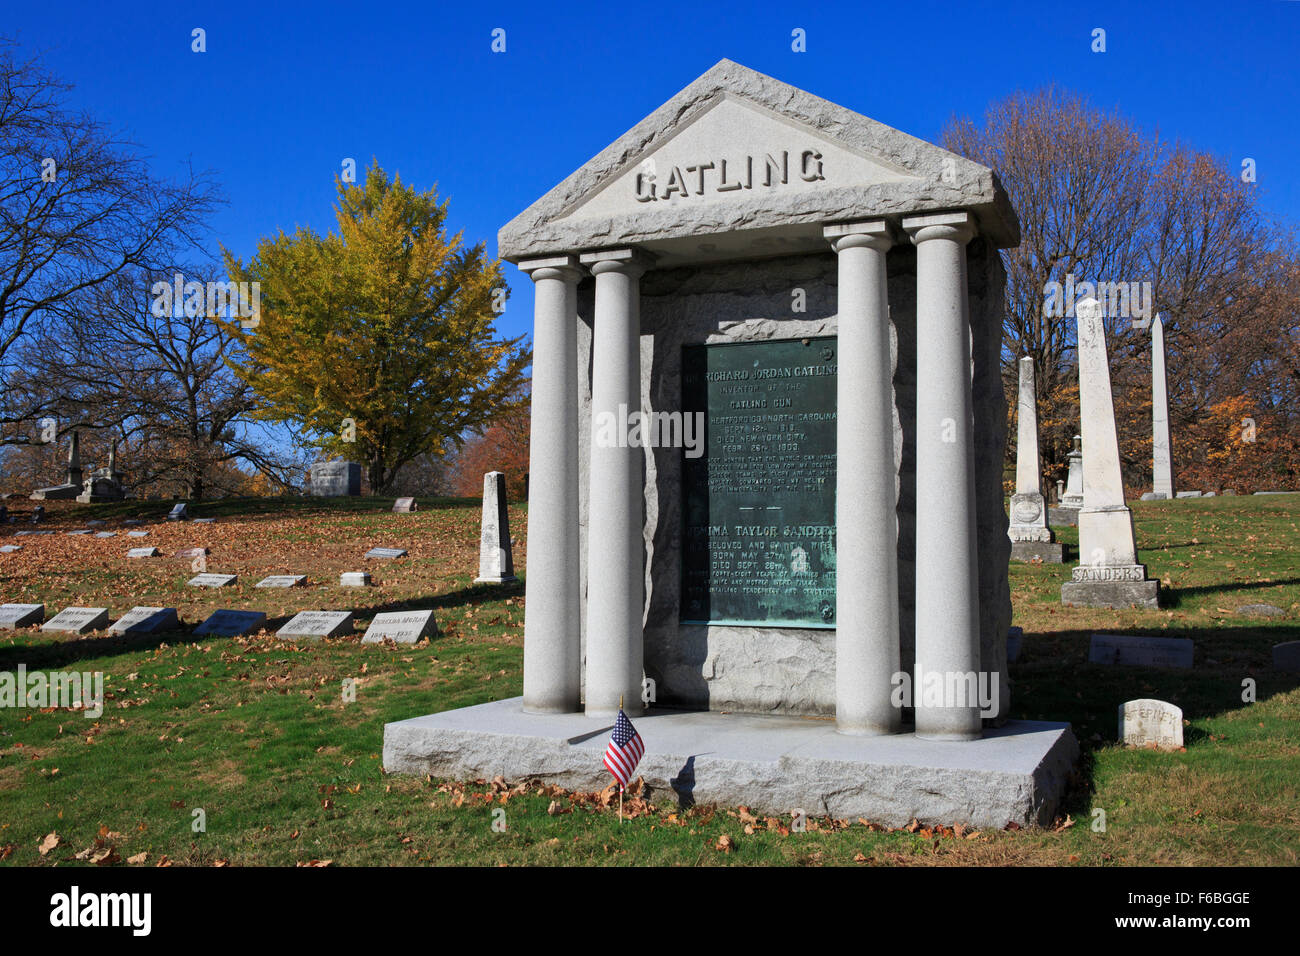 Memorial grave marker to Richard Jordan Gatling, inventor of the Gatling gun, Crown Hill Cemetery in Indianapolis, Indiana. Stock Photo